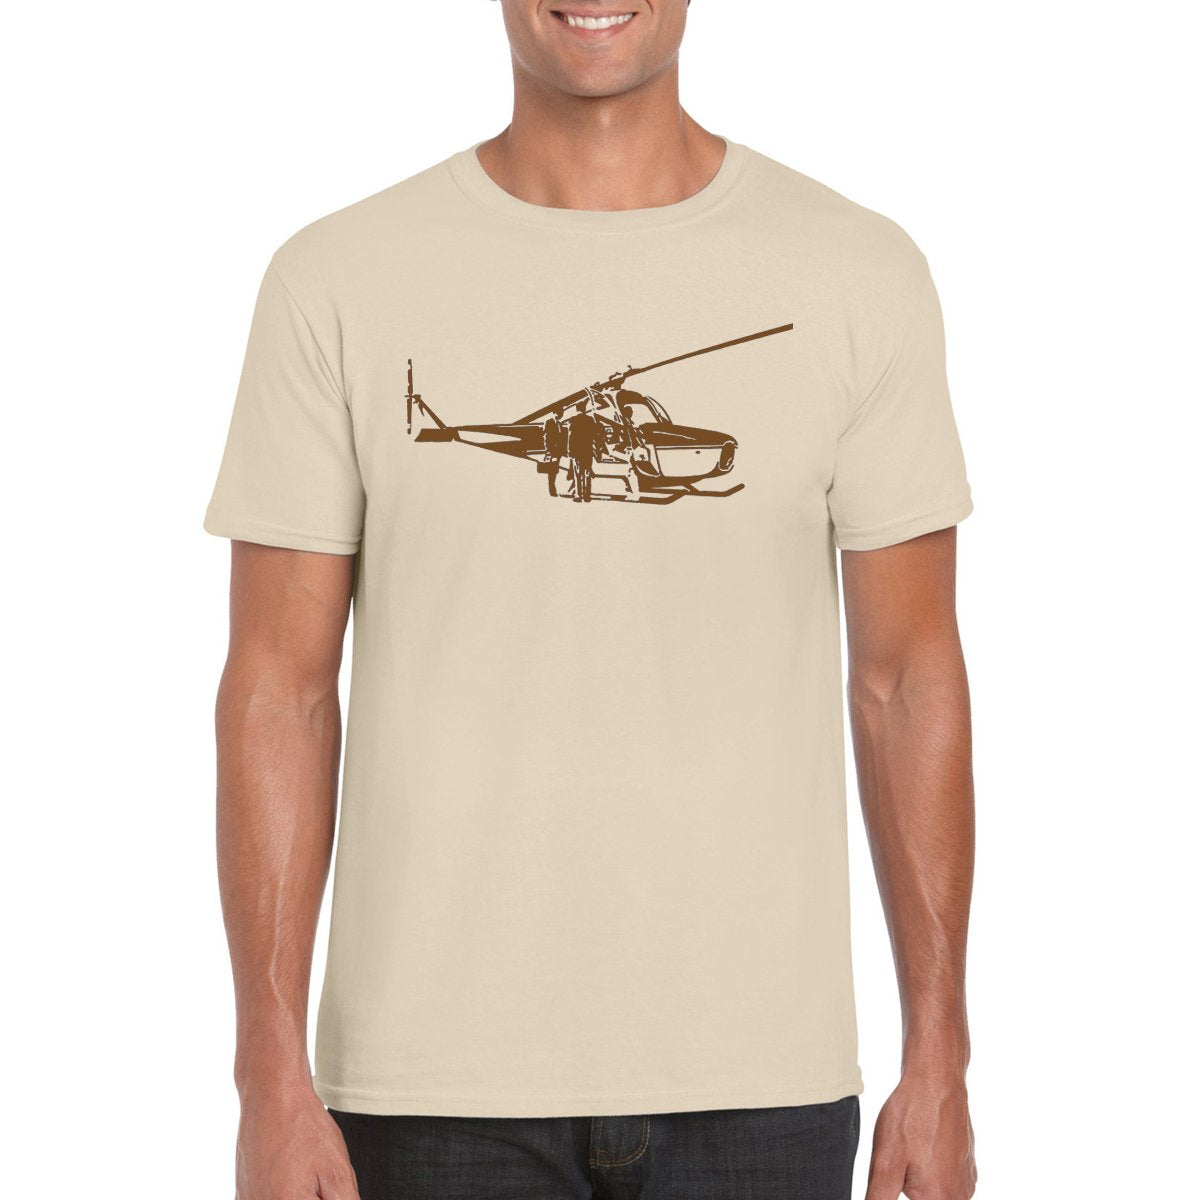 CH-1 SKYHOOK Helicopter T-Shirt